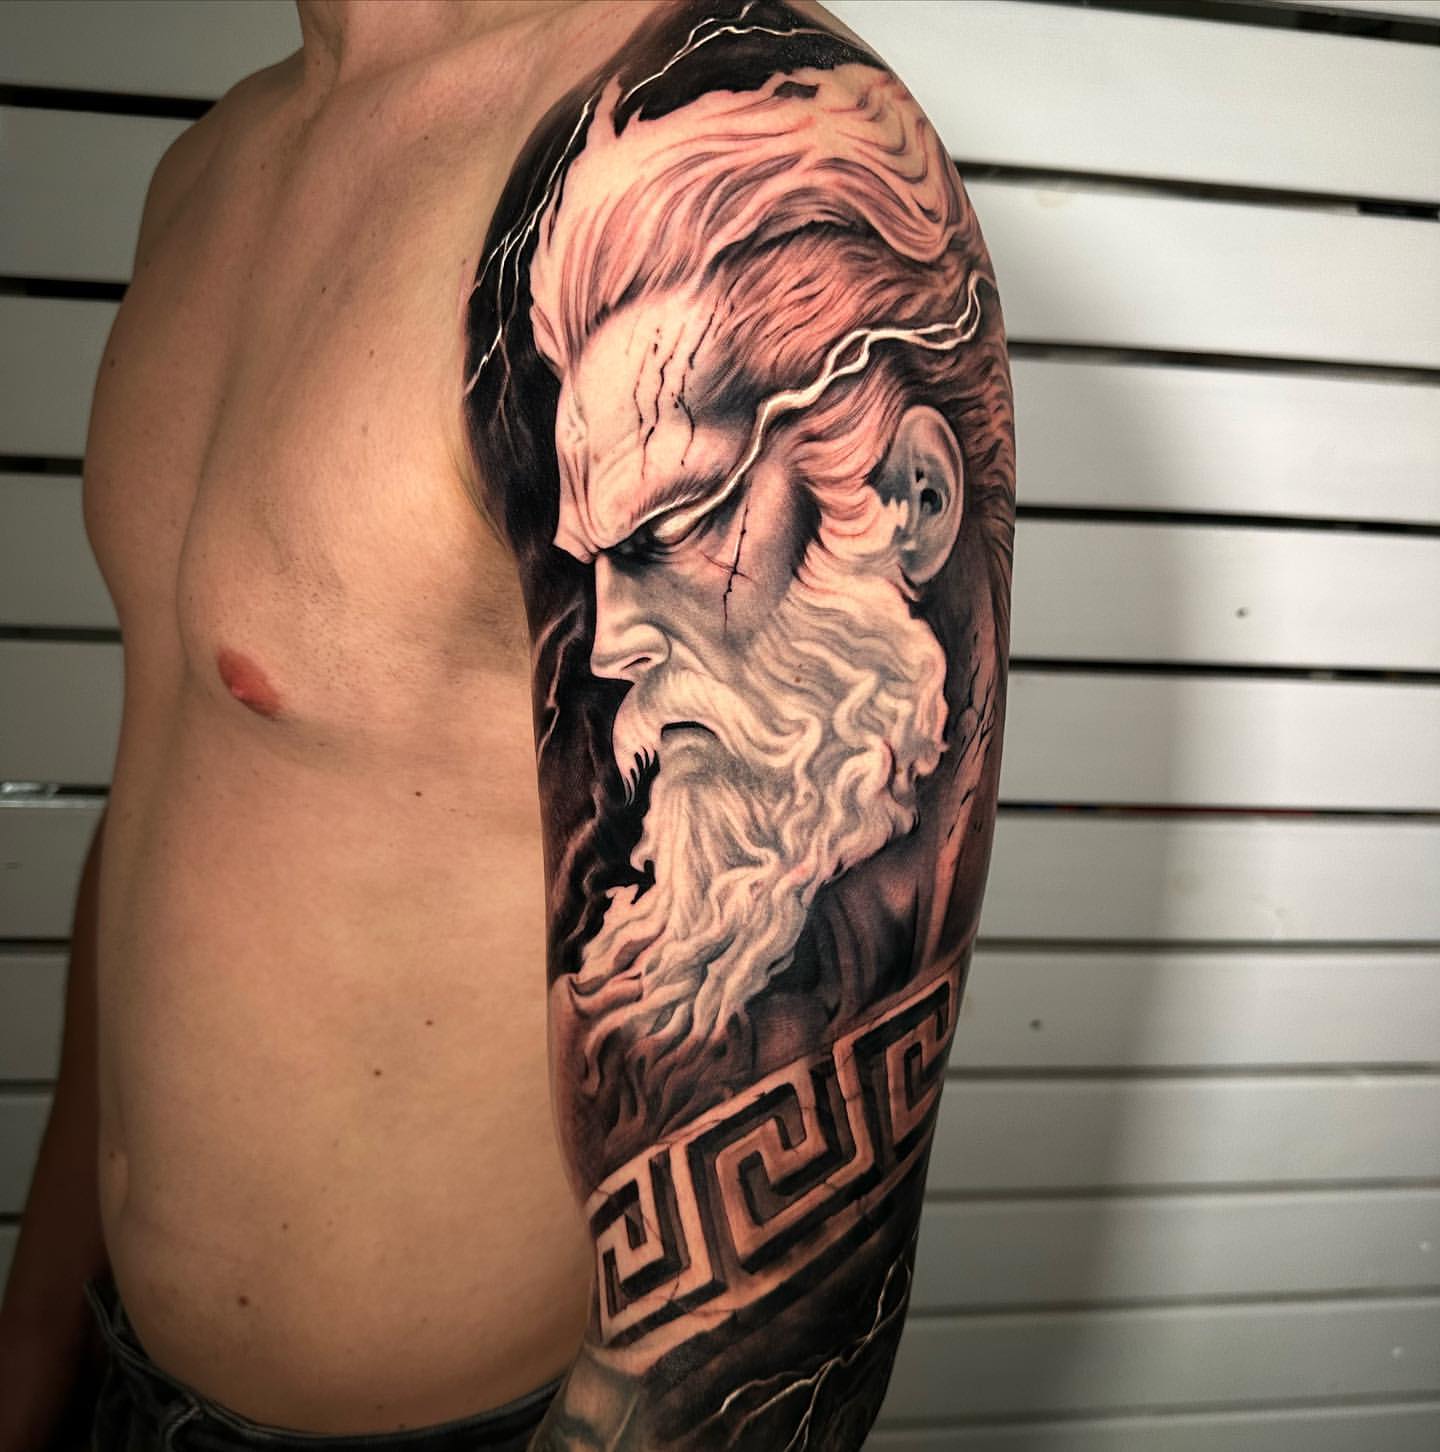 Amazing Zeus Tattoo Designs You Need To See! Outsons Men's Fashion Tips And  Style Guides - YouTube